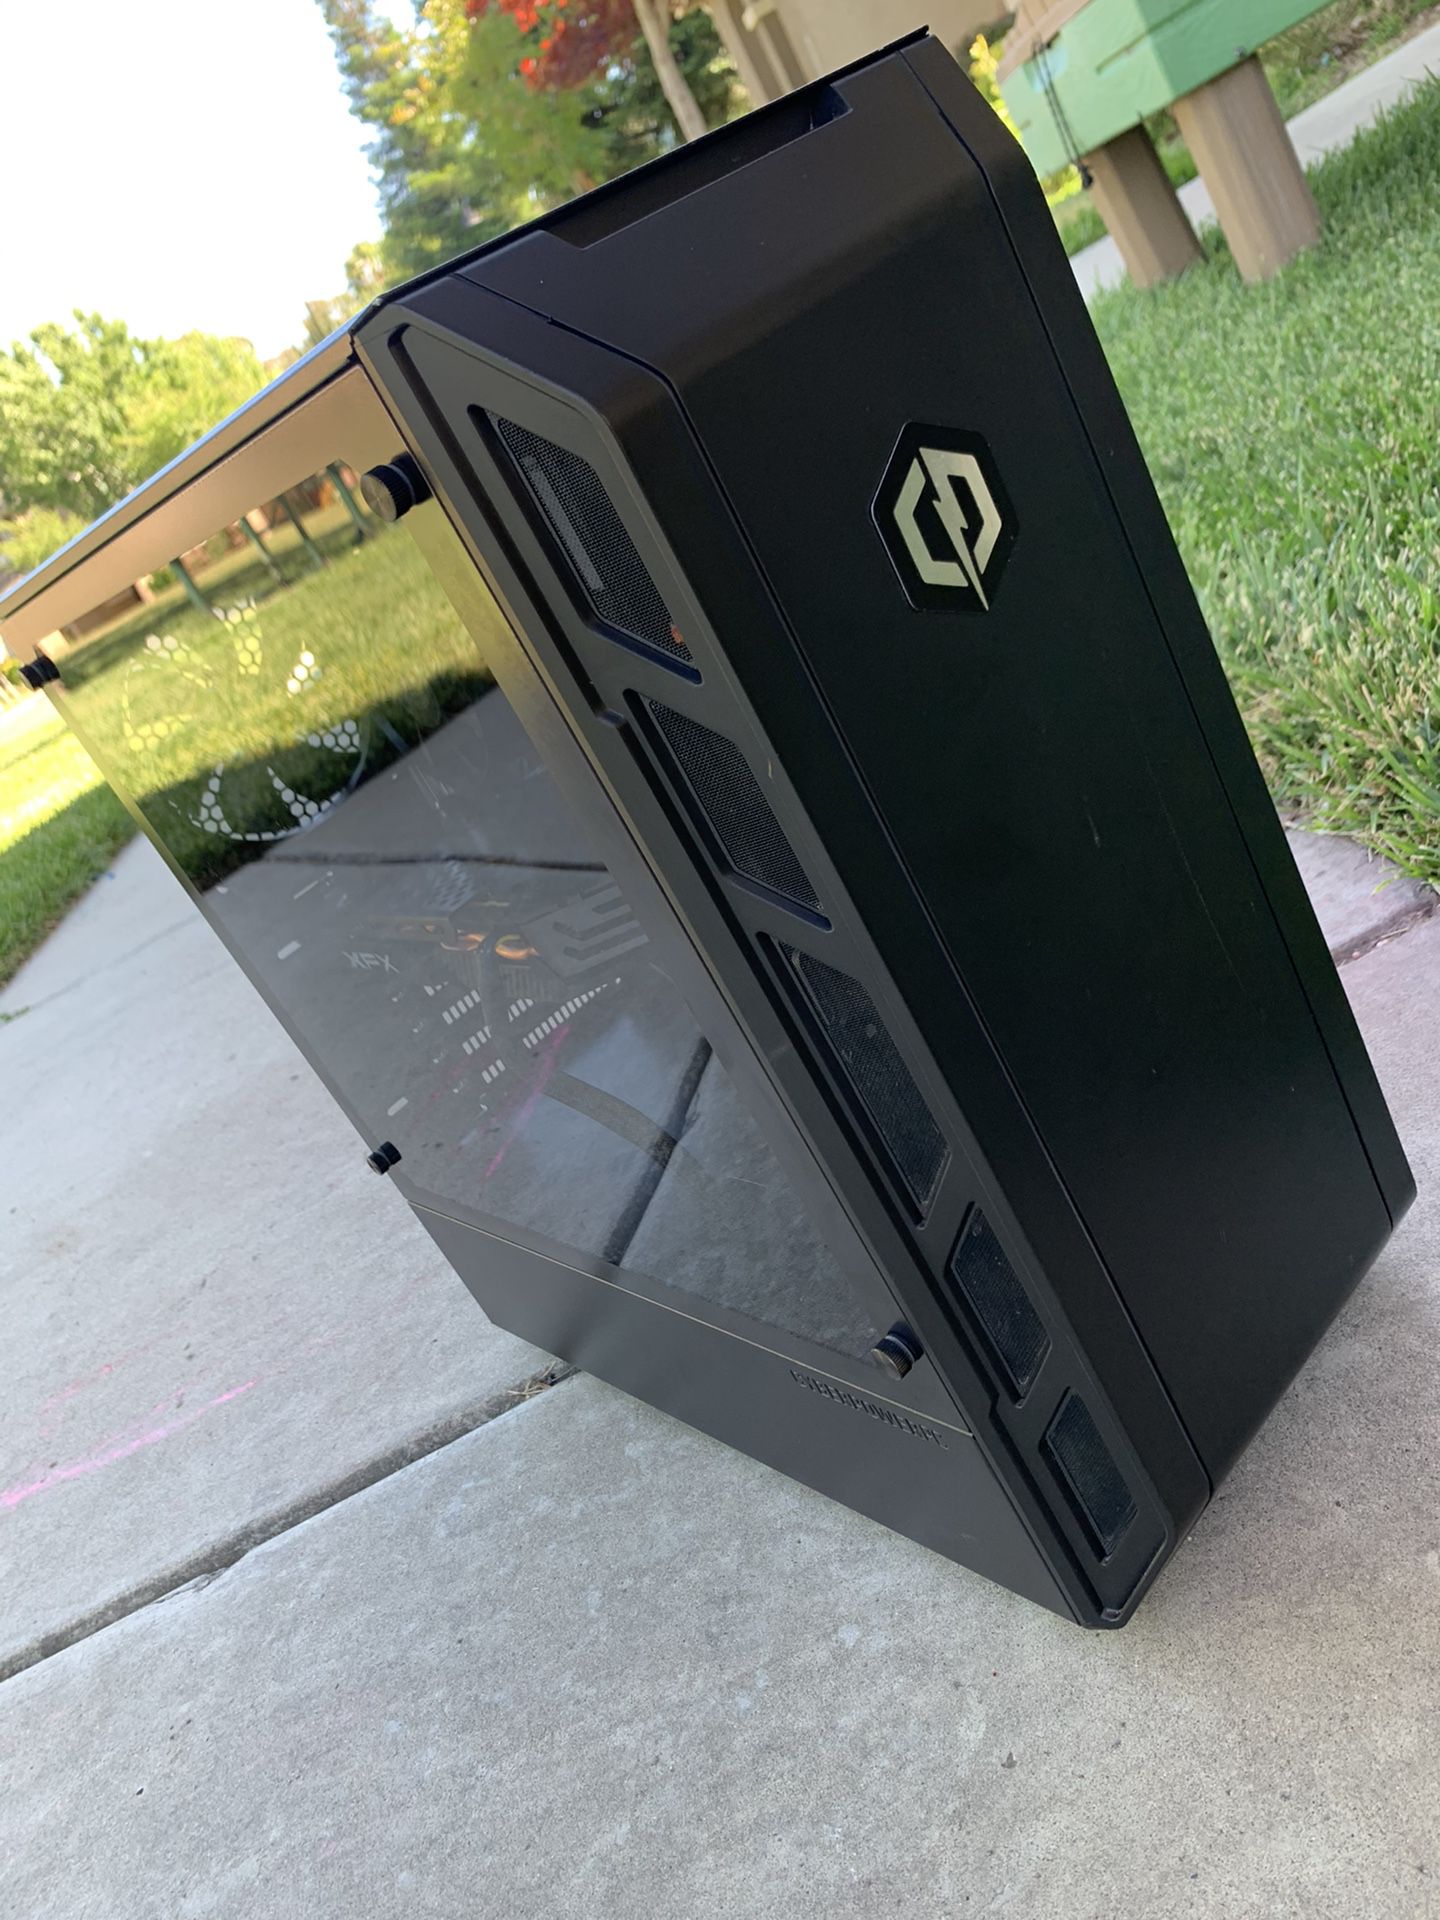 CyberPower PC Gaming Computer